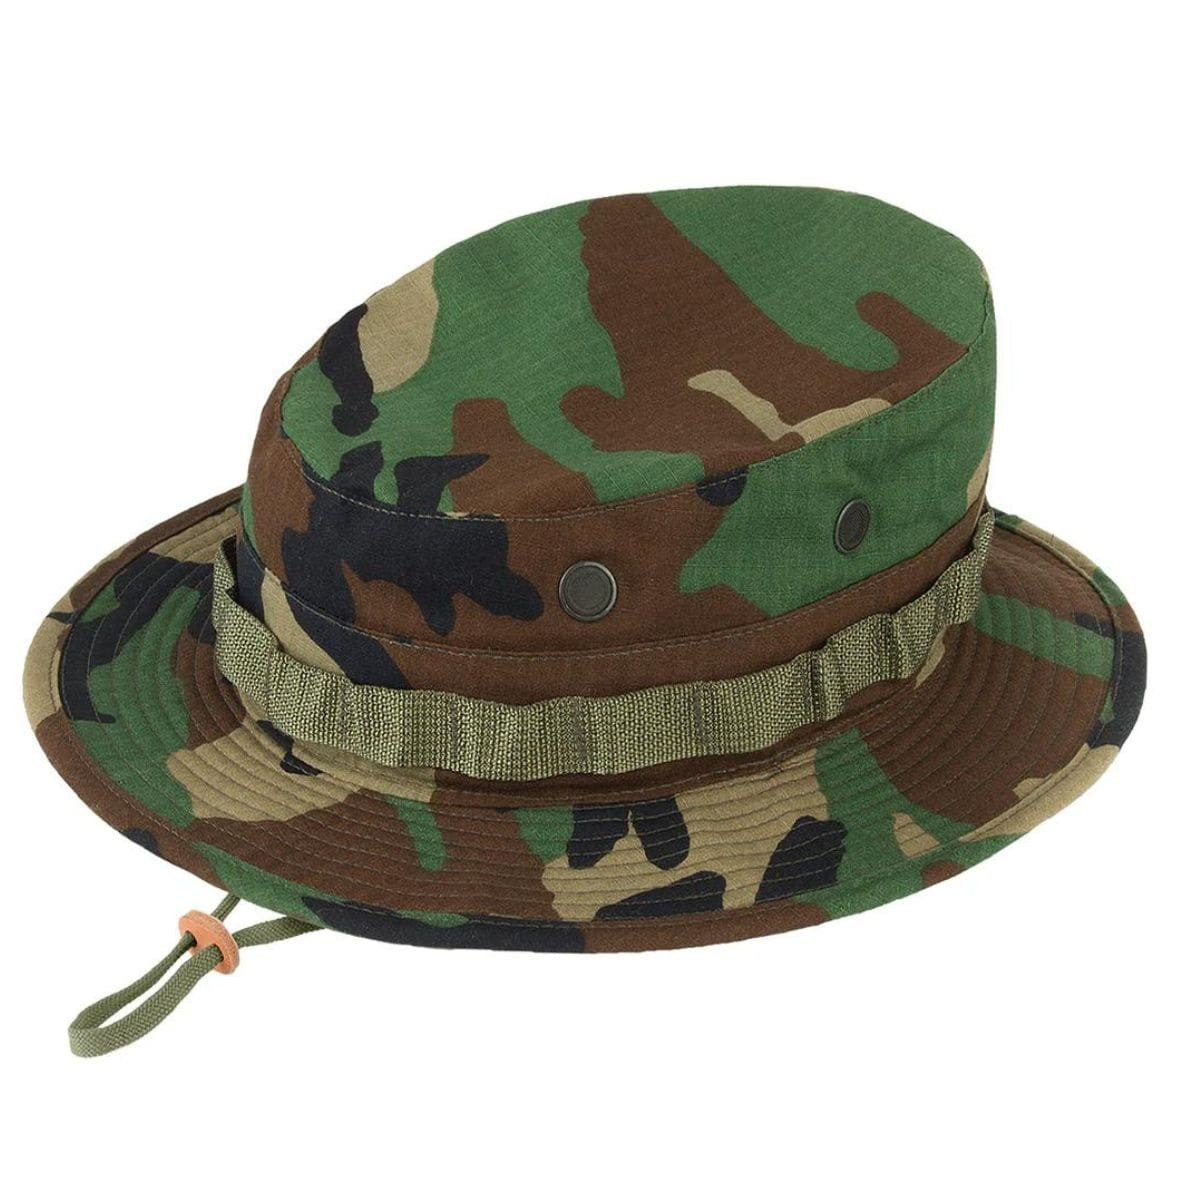 Image of NEW U.S. Issue Boonie Jungle Hat, Nyco Rip-Stop